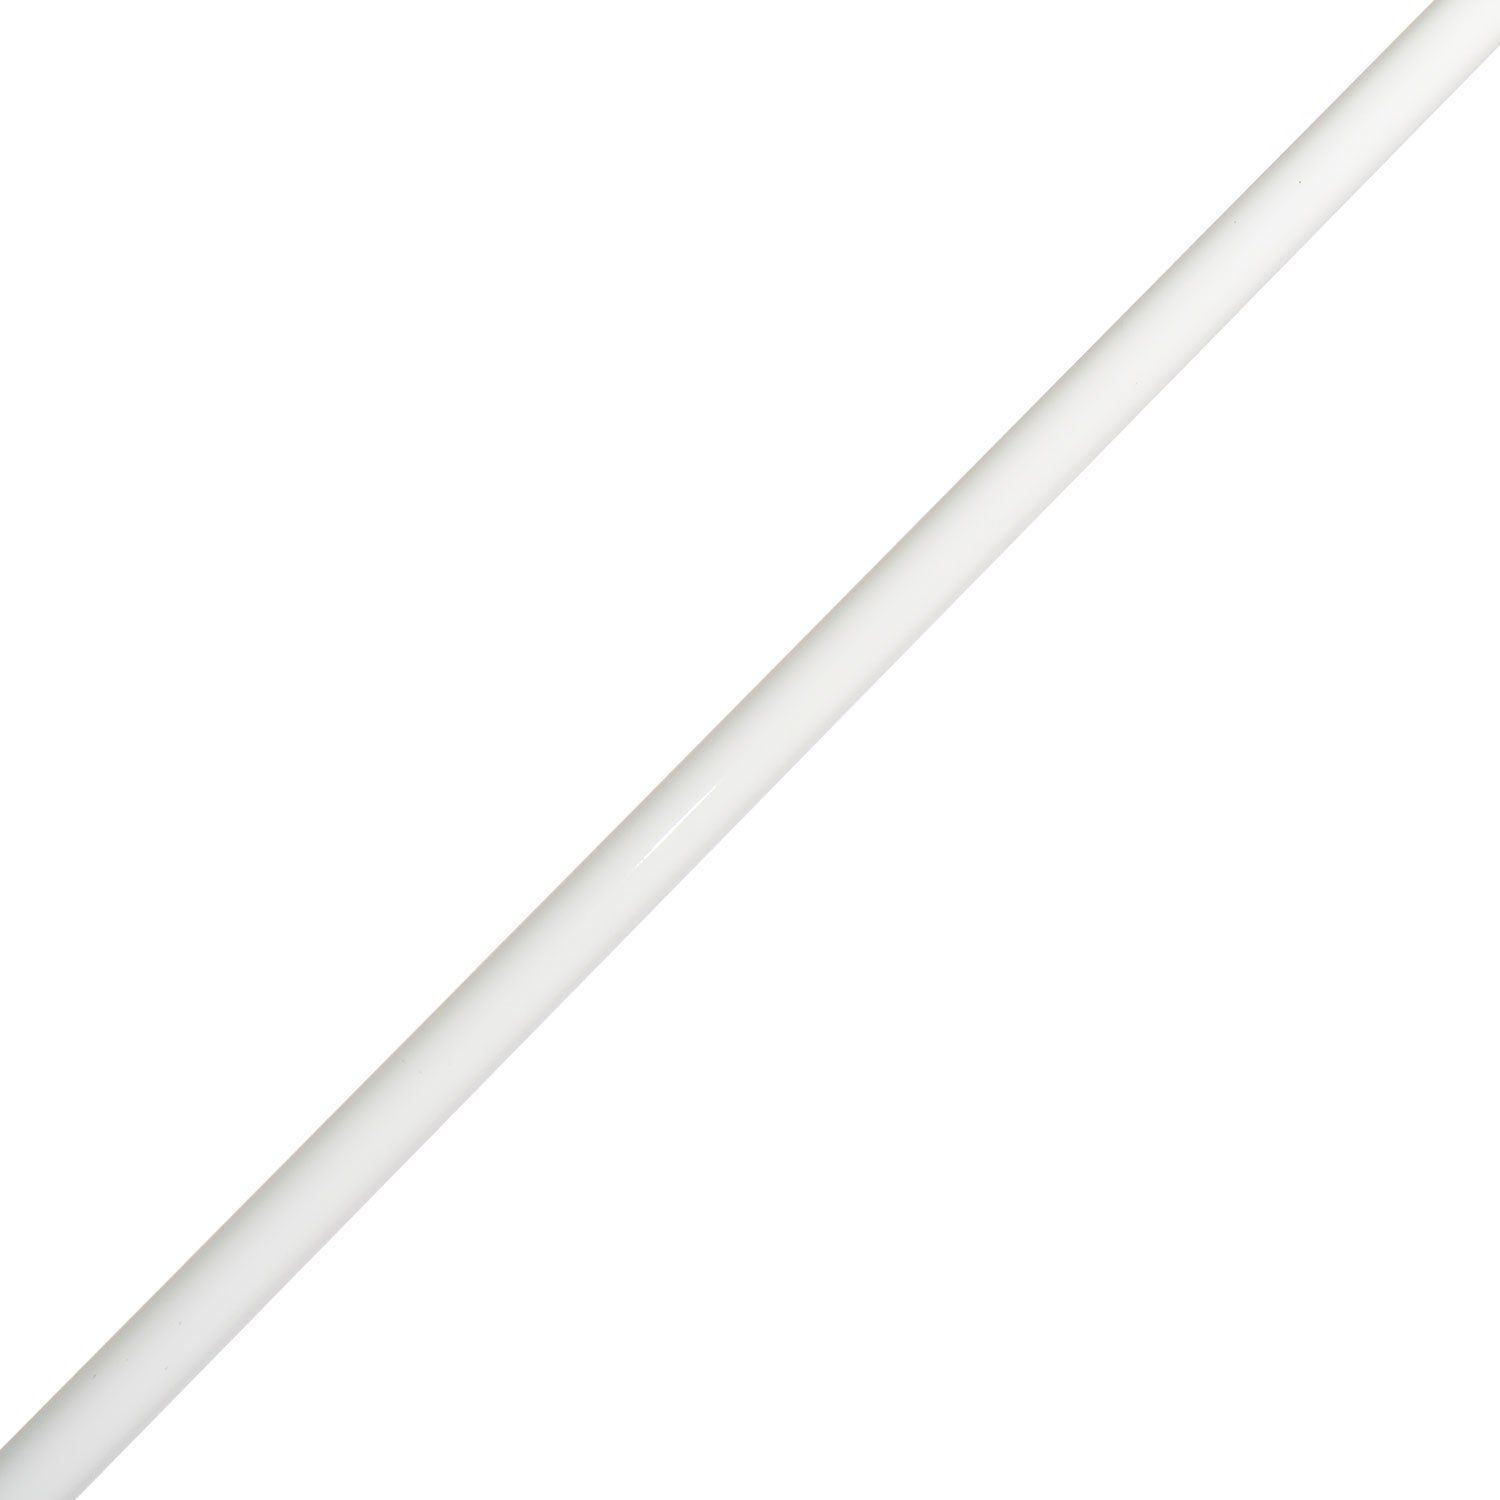 CRB 6'6" Light Color Series Rod Blank - IS661L